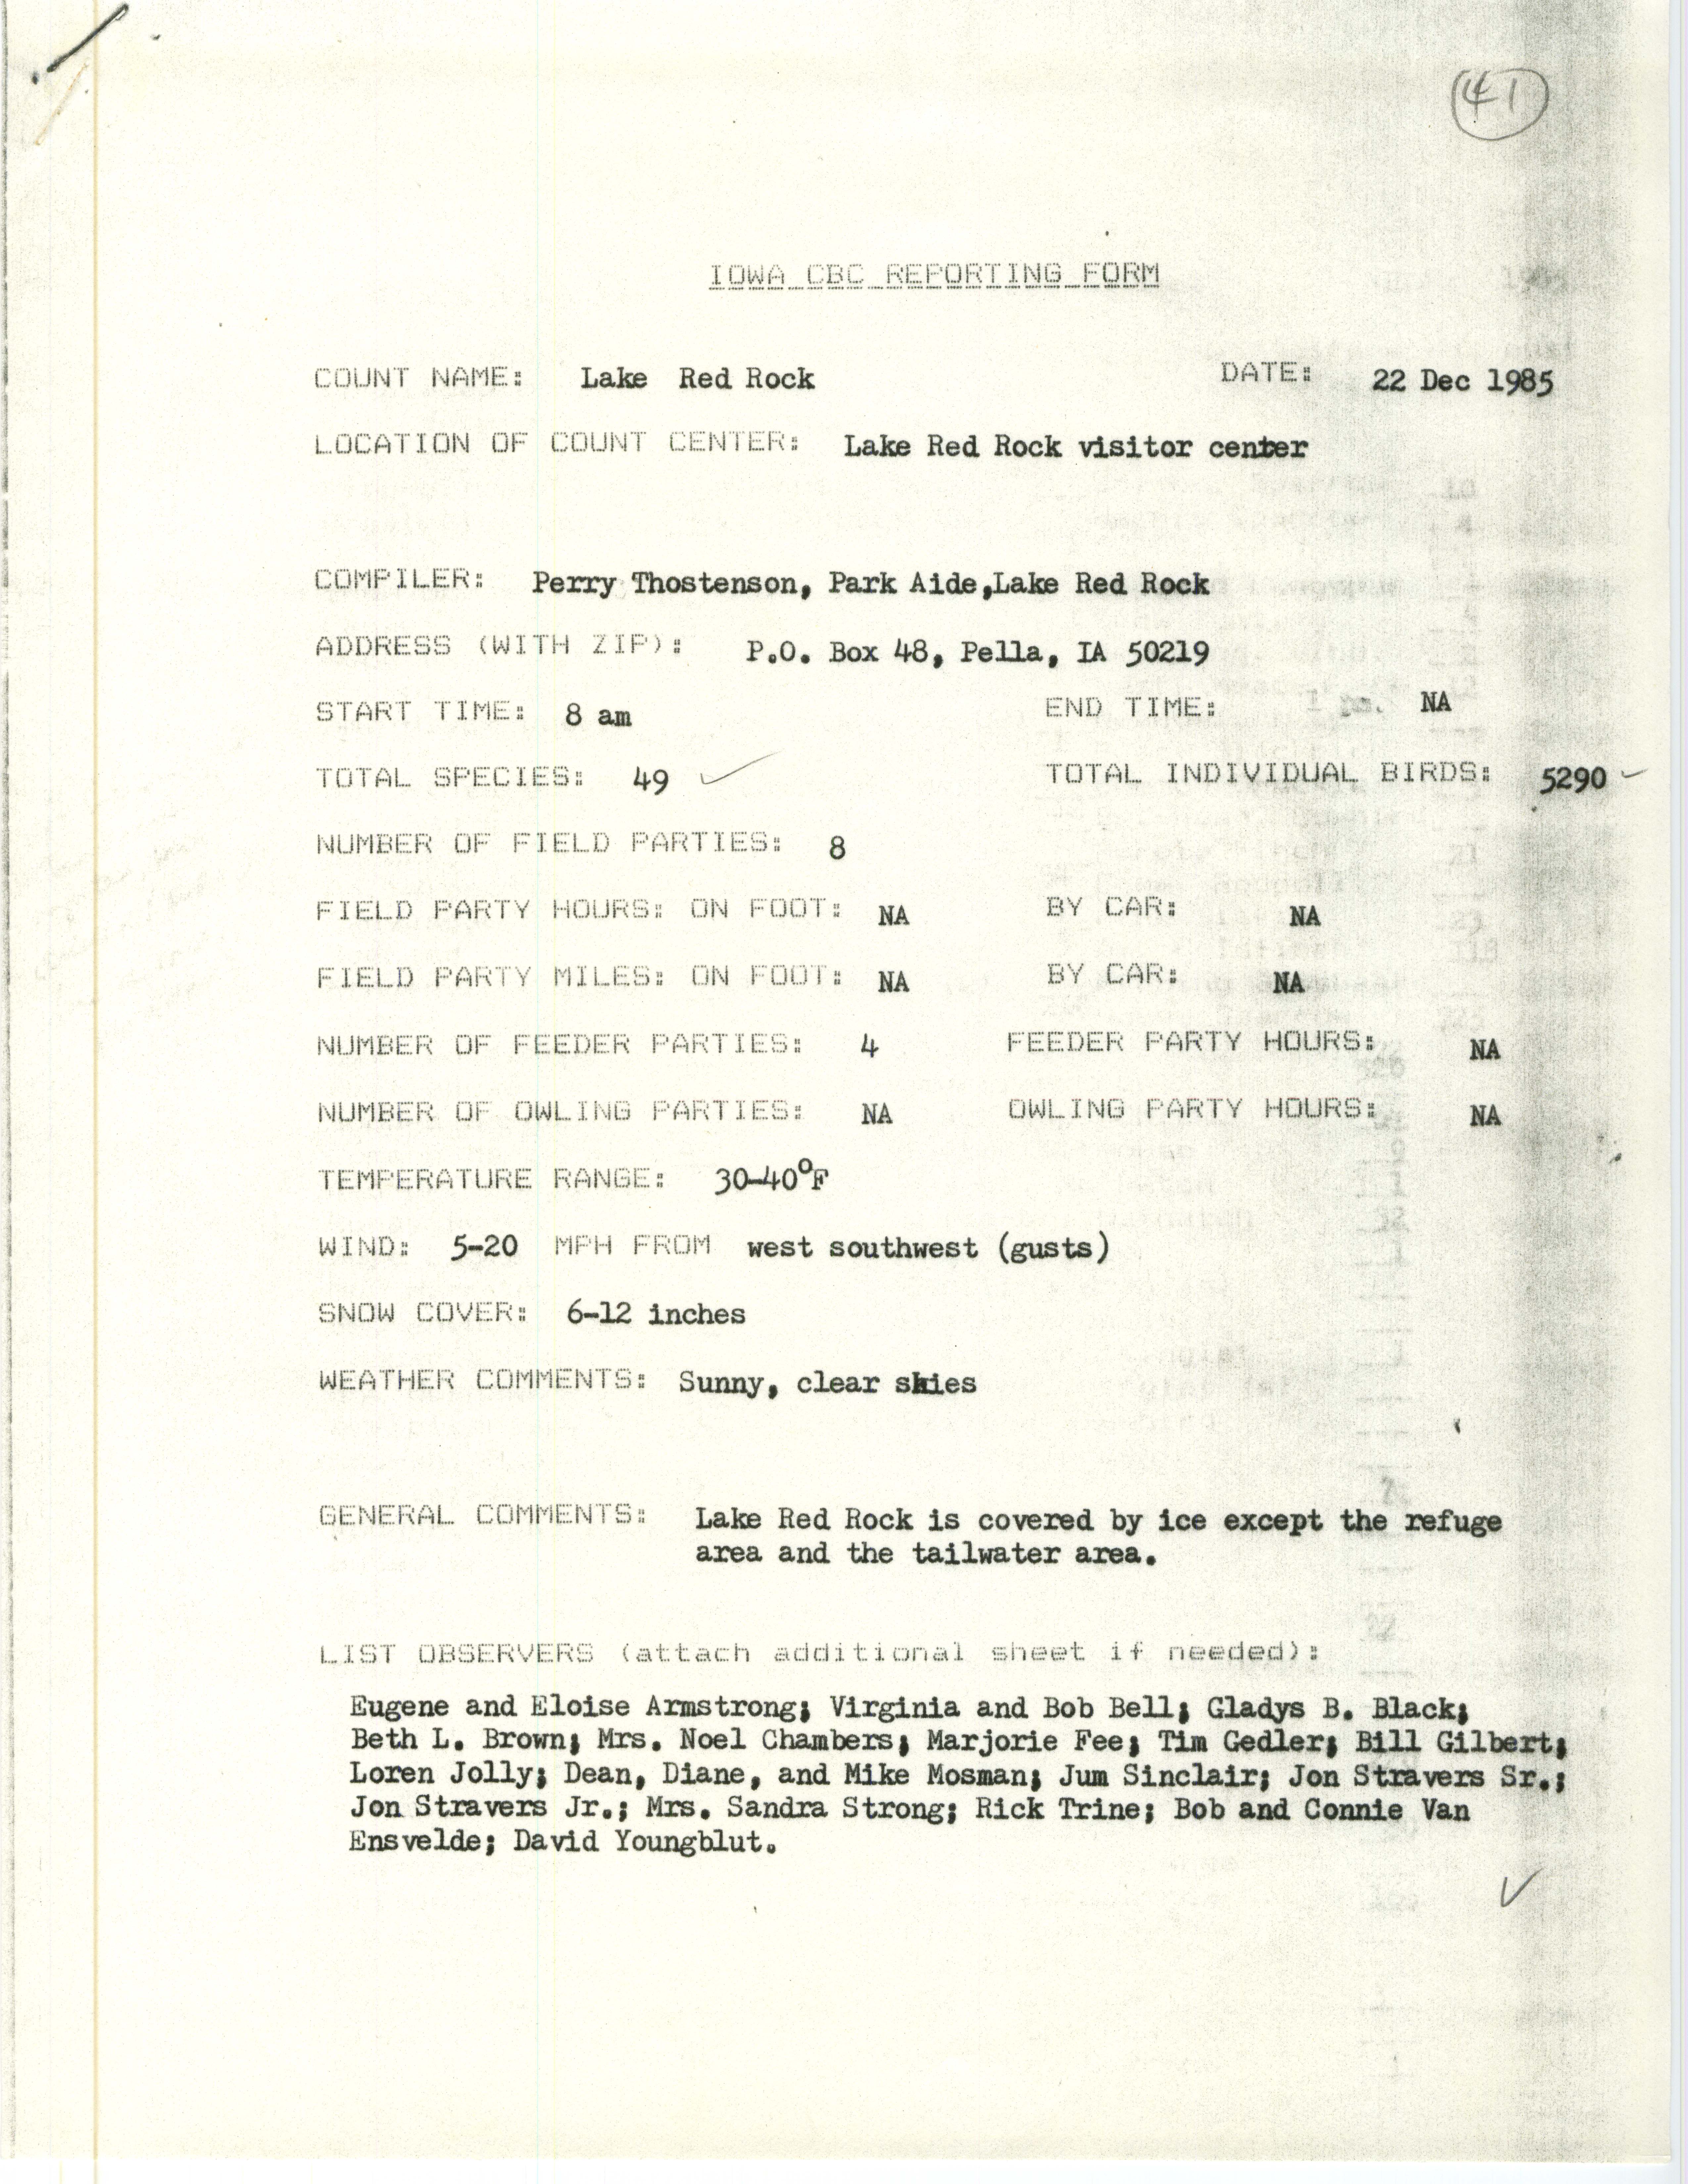 Iowa CBC reporting form, Lake Red Rock, December 22, 1985